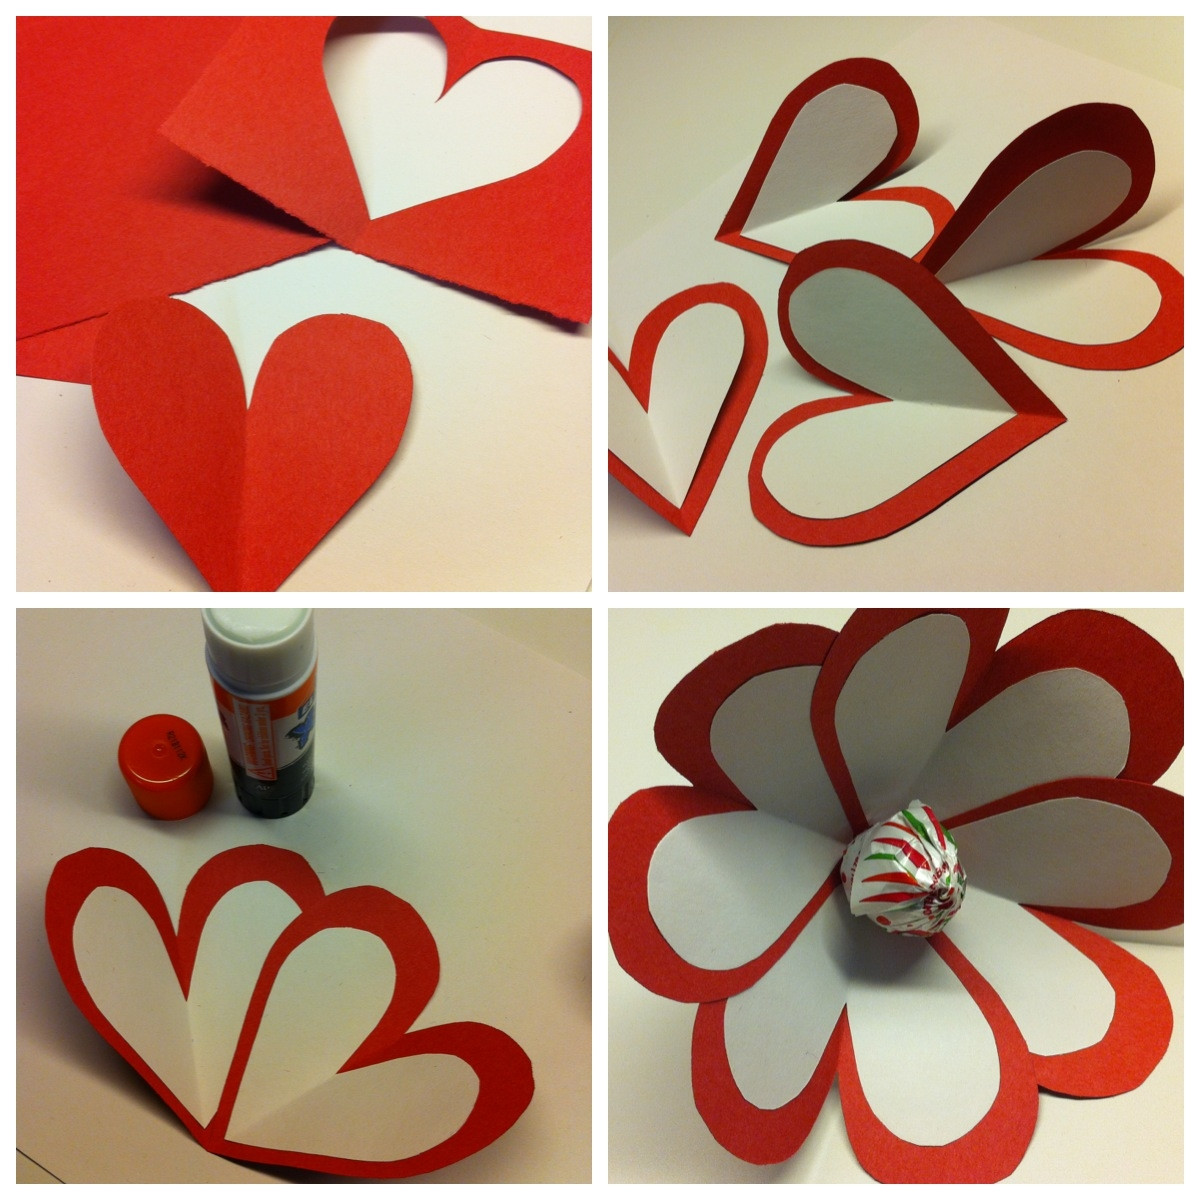 Crafts For Valentines Day
 Free Romantic Cards 2014 Free Romantic eCards